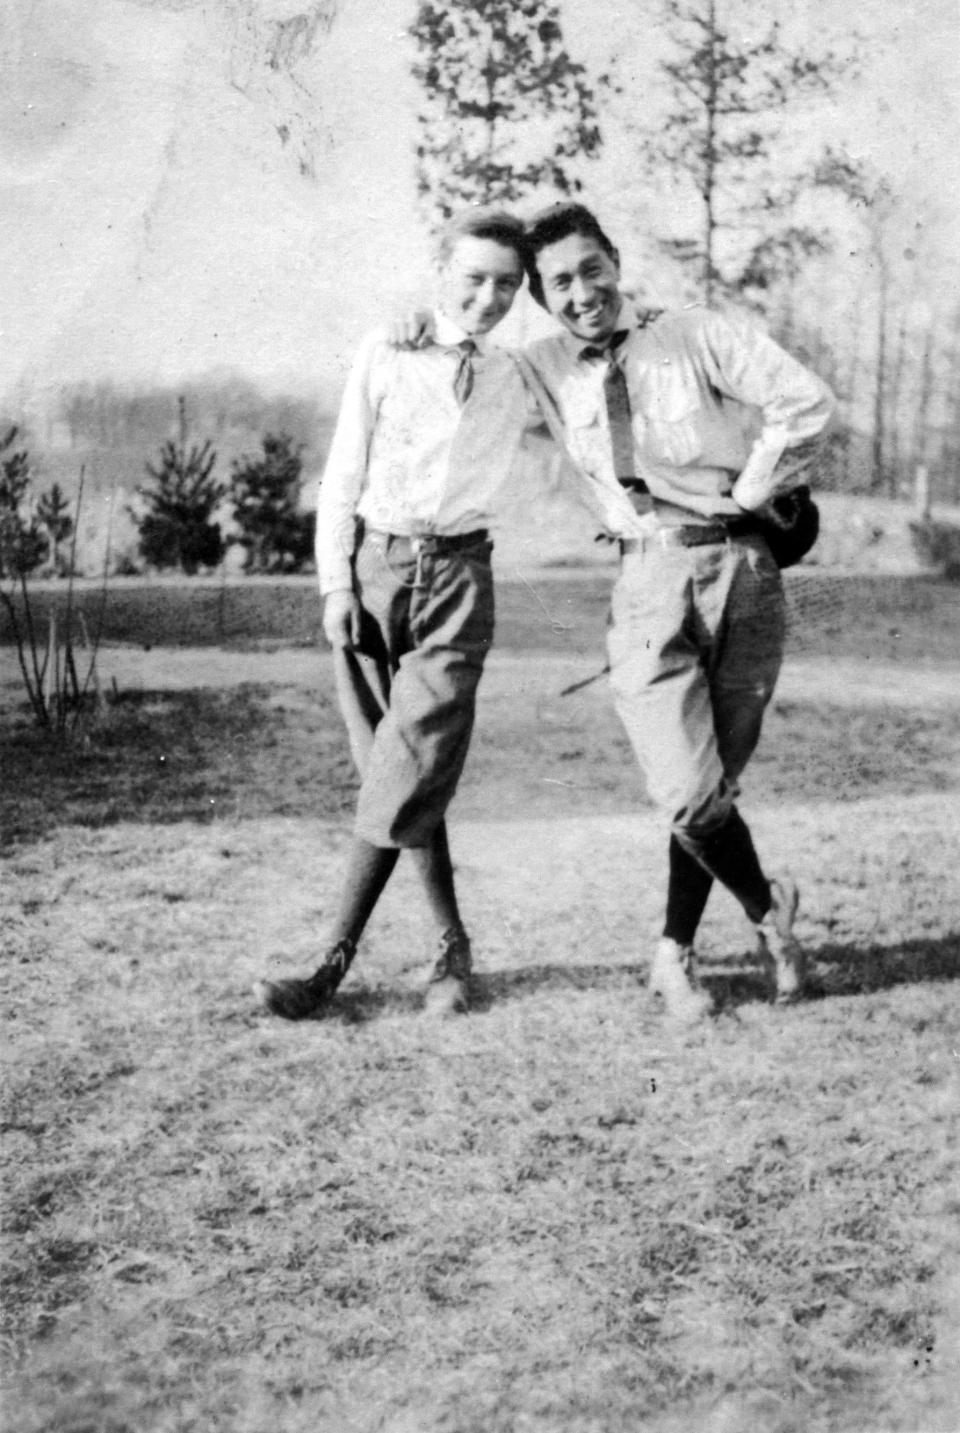 George Masa, right, with his photographic assistant Blake Creasman, circa 1916, when Masa was living with the Creasman family in Biltmore. The photo is part of the Creasman Archive at Pack Memorial Library.